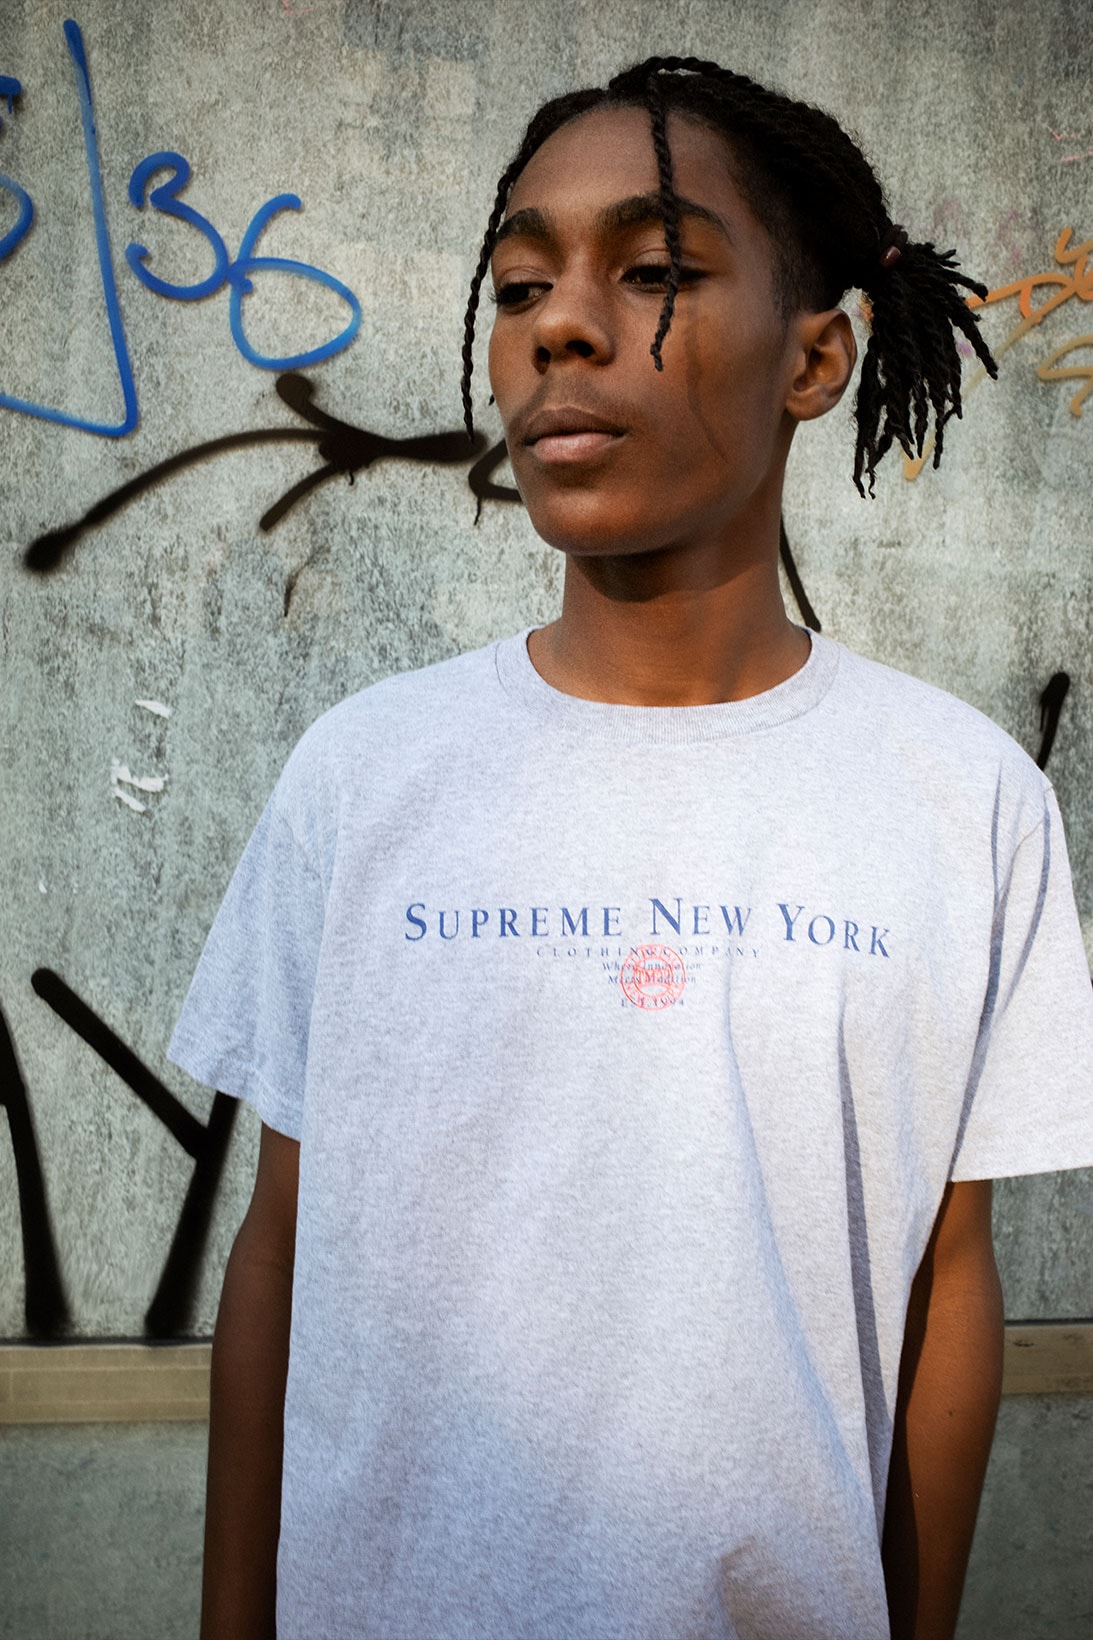 Supreme Fall Tees Shirts Collection Images Release Date Info